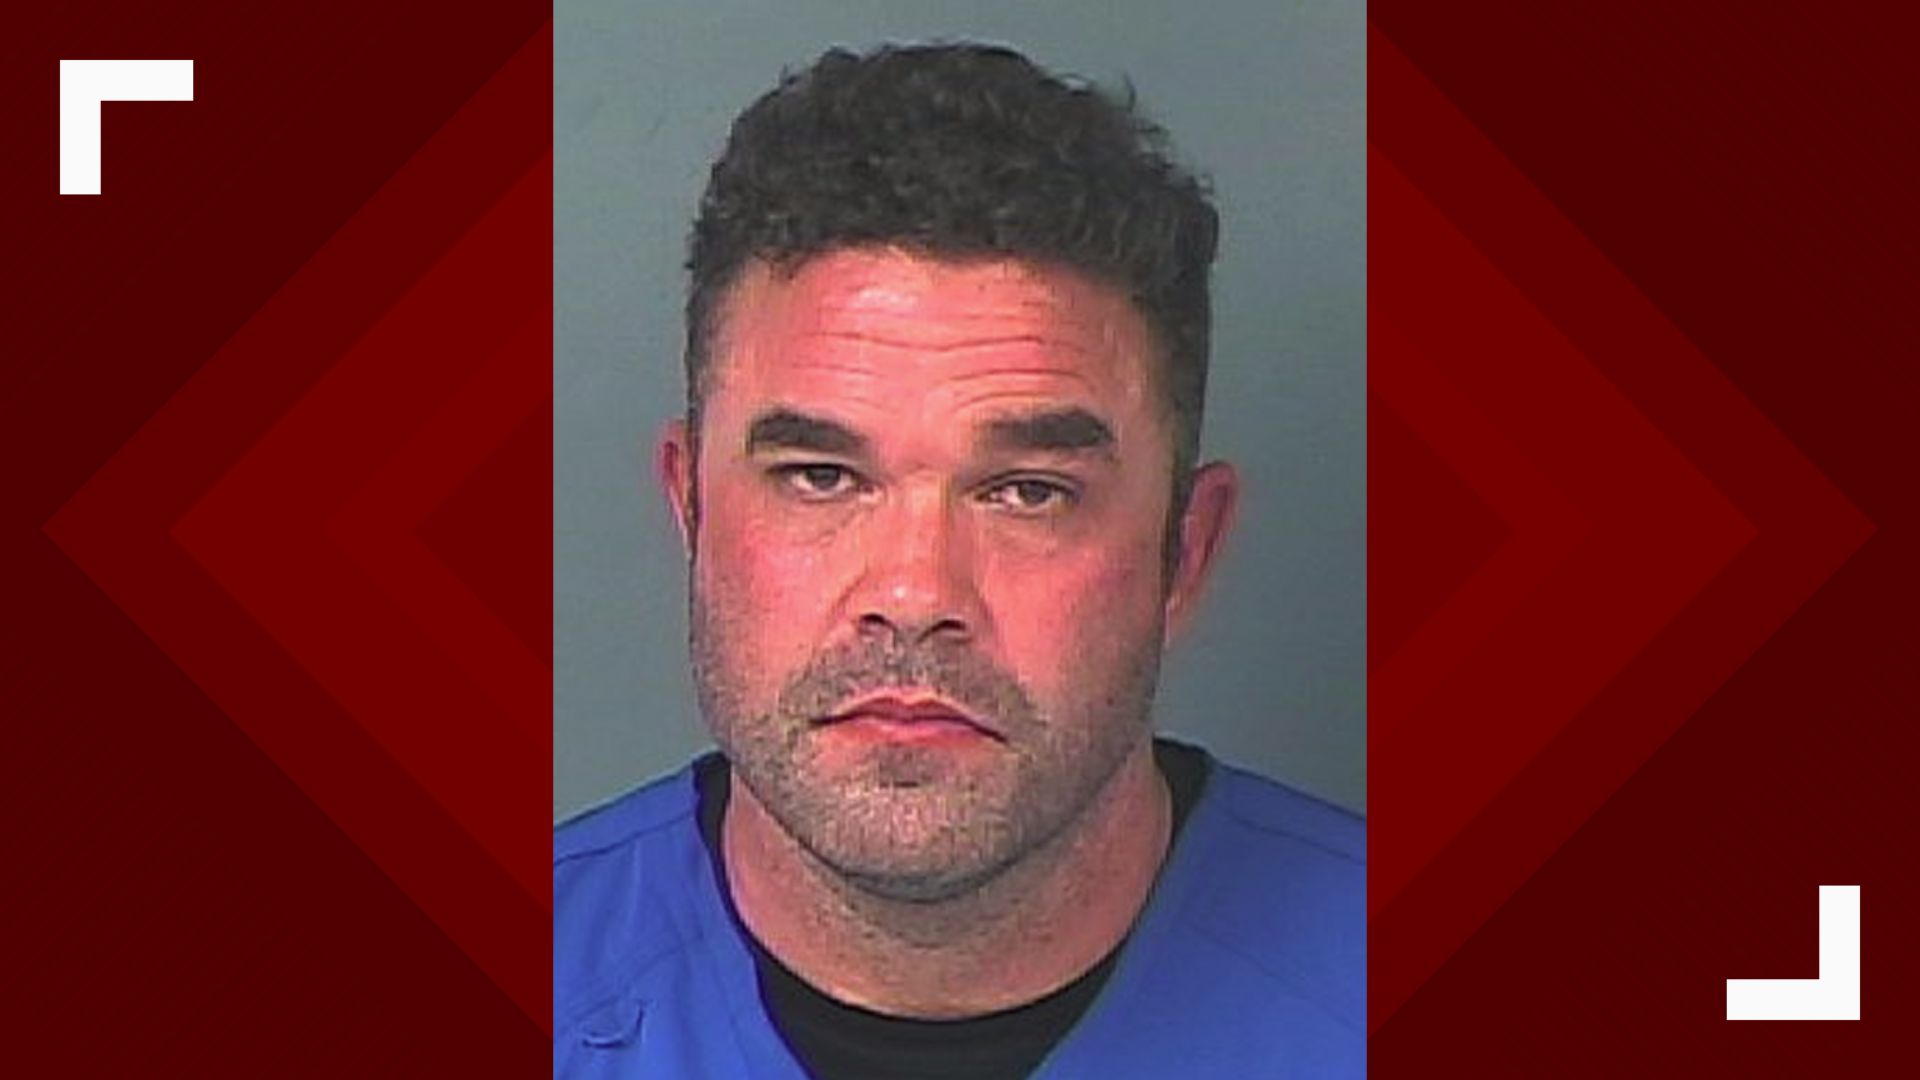 An East Lake Fire Rescue lieutenant is facing human trafficking charges.

Lt. Matthew Doyle, 39, is in the Hernando County Jail after he was arrested by the Florida Department of Law Enforcement for human trafficking, according to the Hernando County Sheriff’s Office.